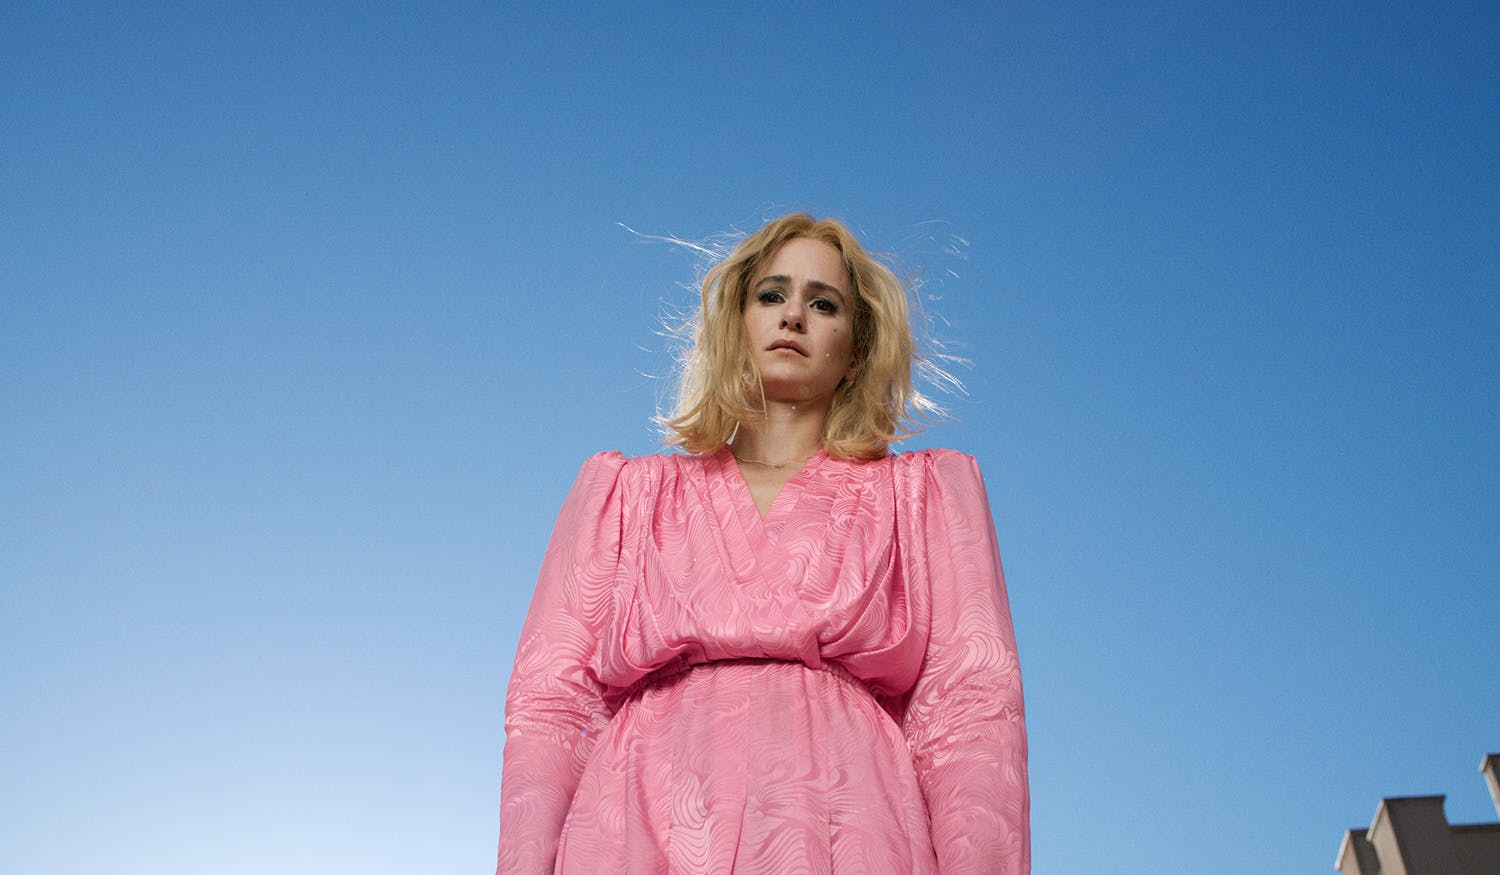 Image by Alex Prager shows a photograph of the character Cecily, who has blonde hair and is wearing a pink dress with a puffy torso and sleeves, stood against a bright blue sky backdrop